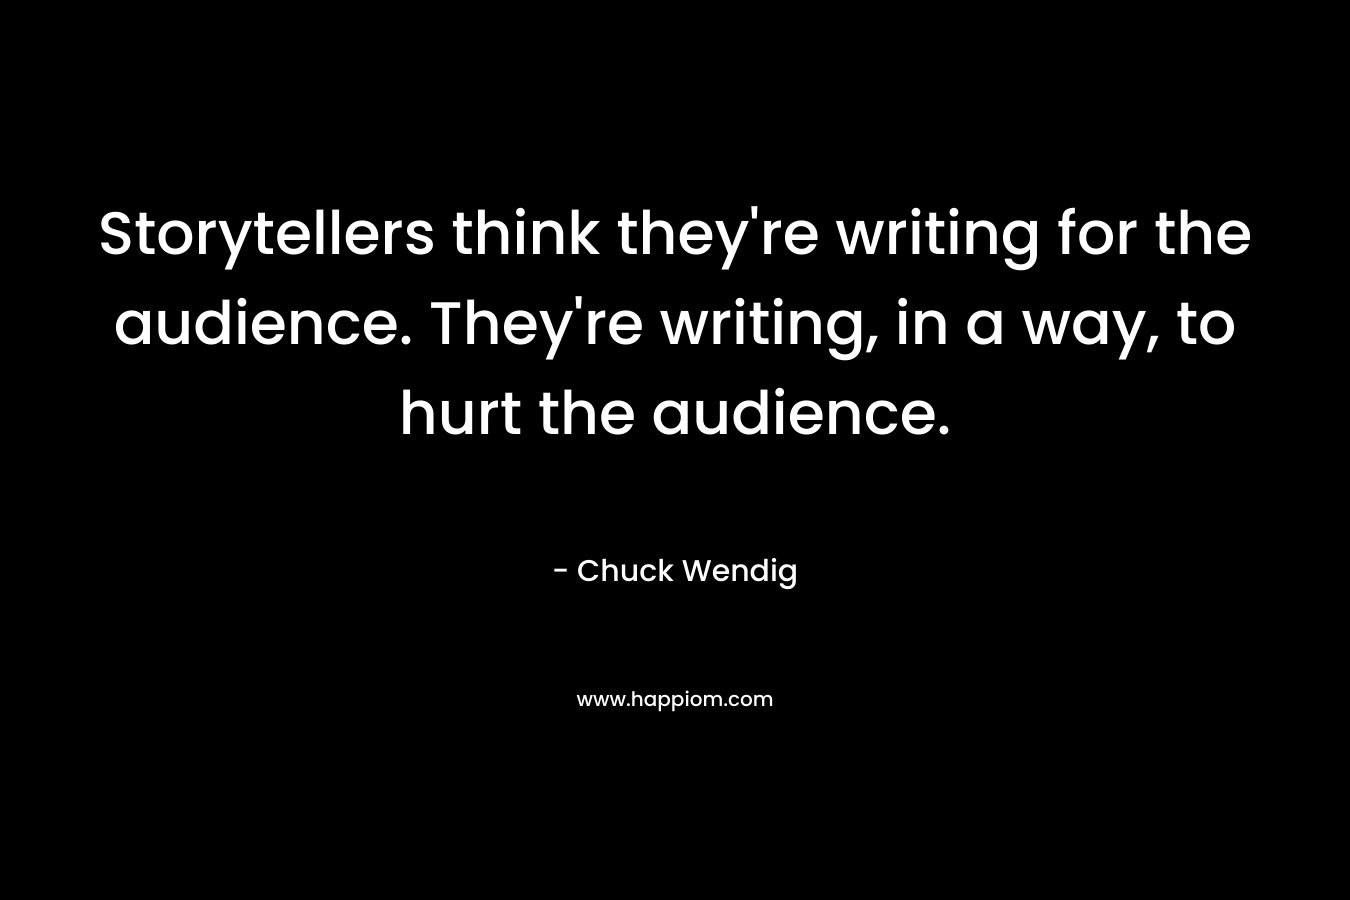 Storytellers think they're writing for the audience. They're writing, in a way, to hurt the audience.